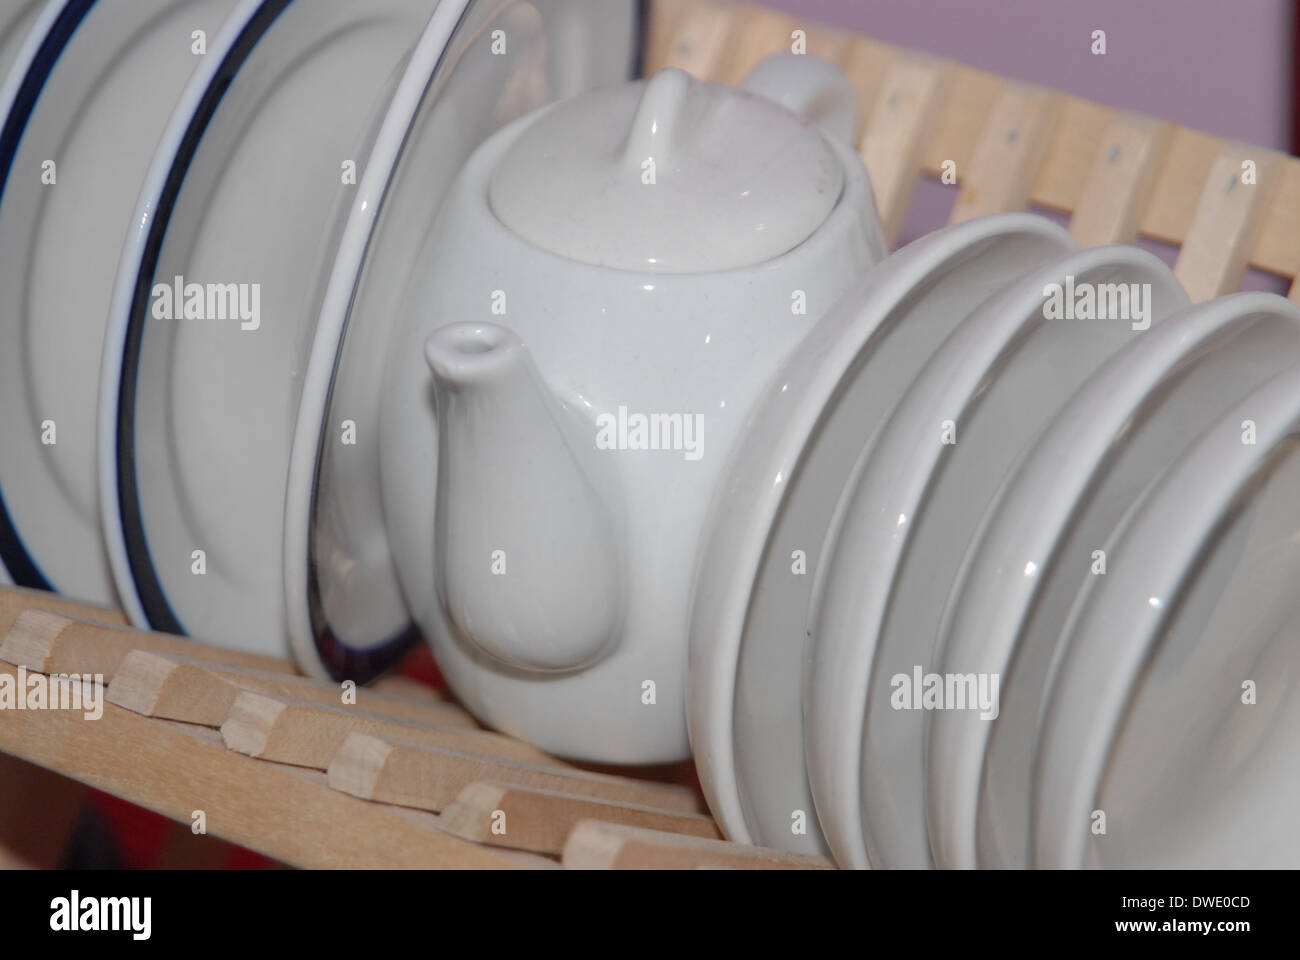 Childrens white porcelain tea set in a wooden dish rack. Saucers with blue rim. Stock Photo